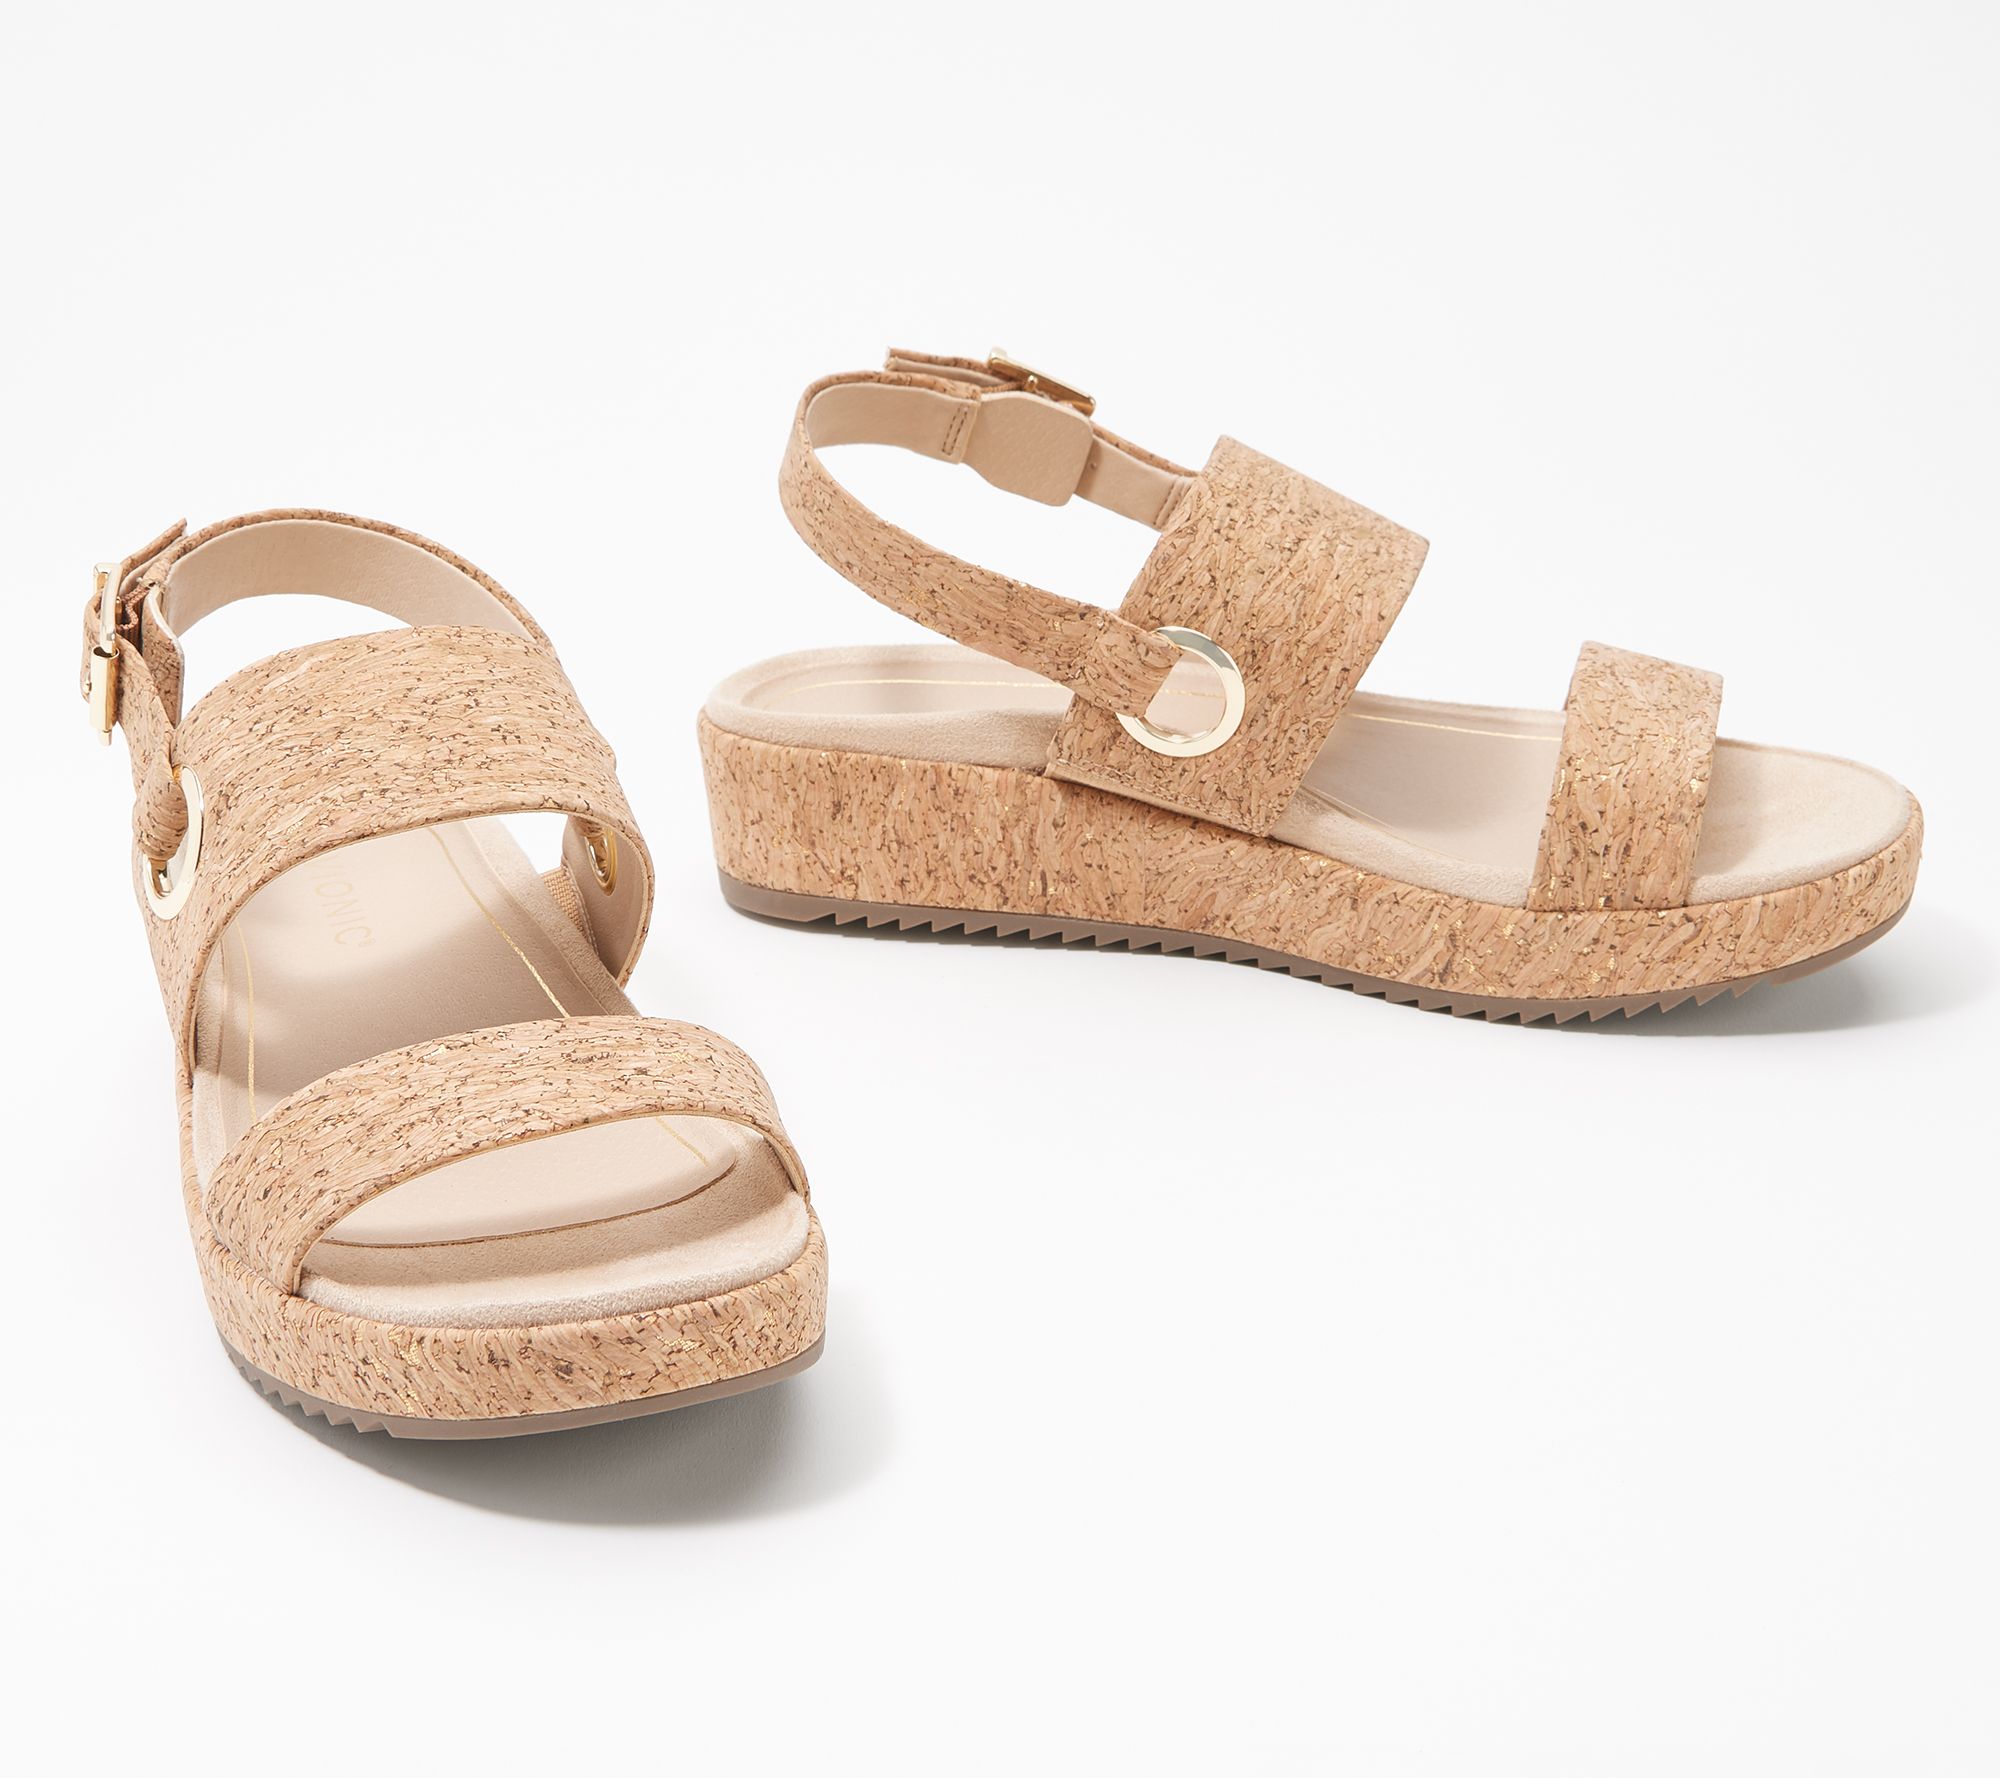 vionic sandals for bunions